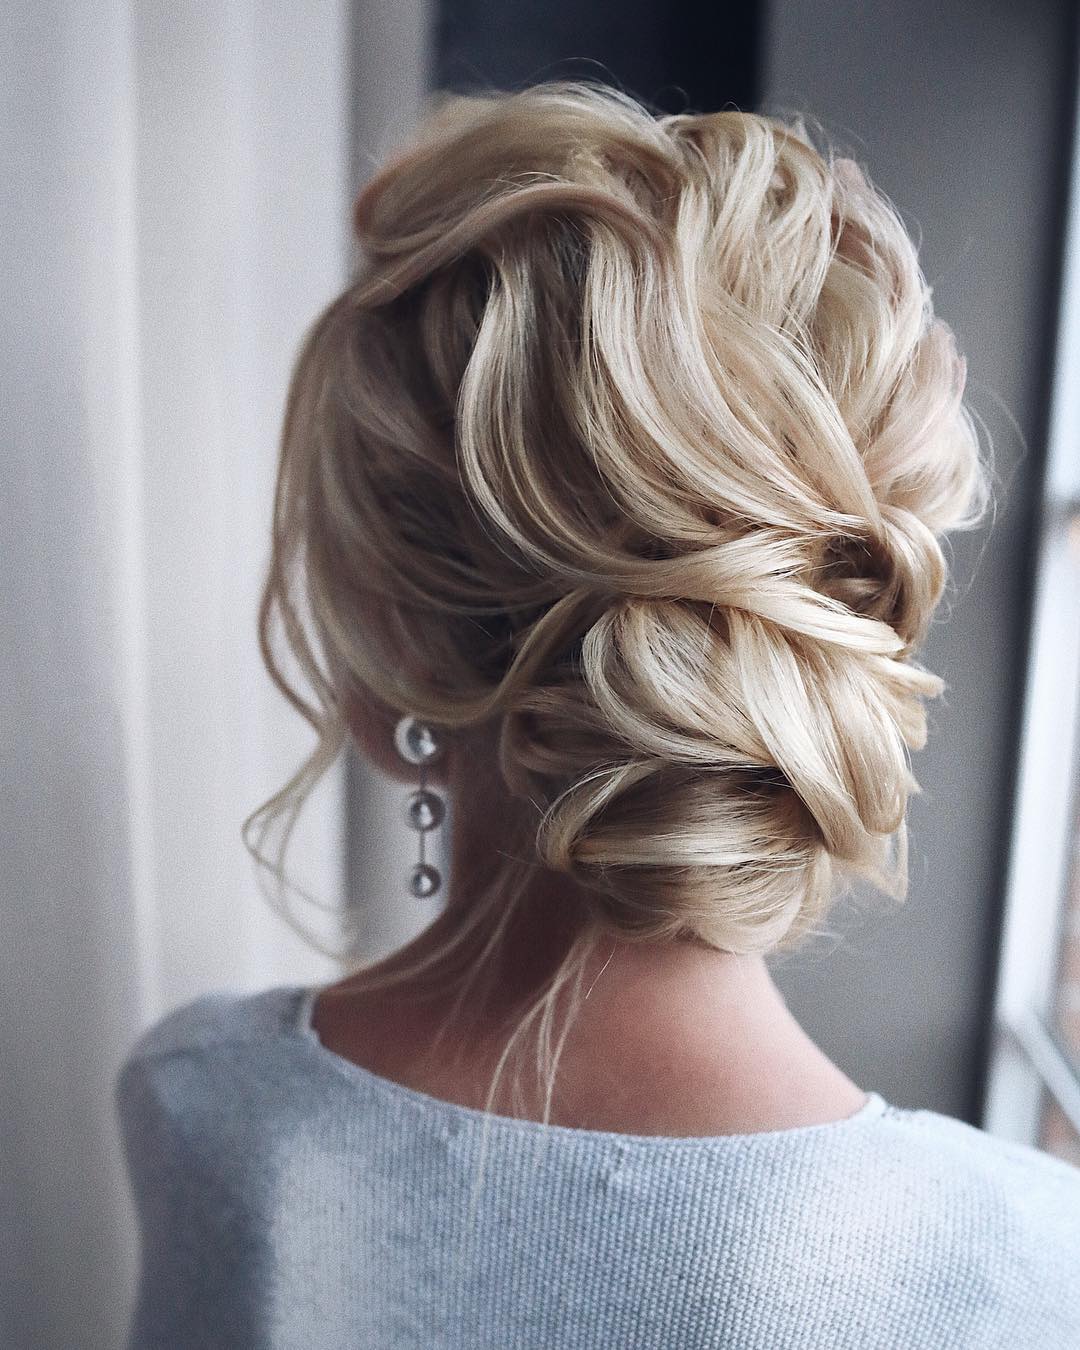 10 Updos For Medium Length Hair Prom Homecoming Hairstyle Ideas 2021